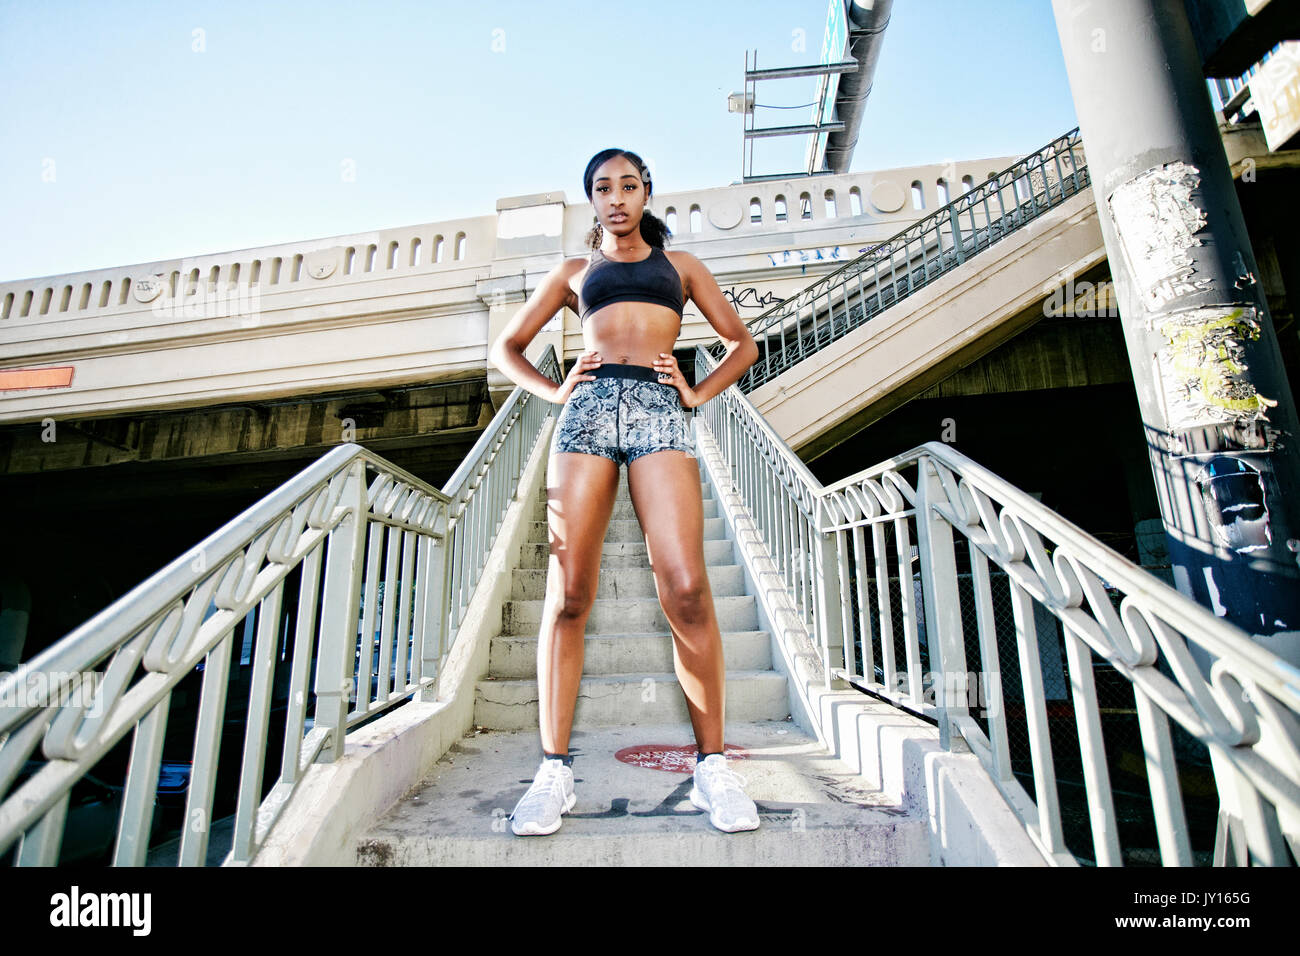 Serious Mixed Race woman standing on urban staircase Stock Photo